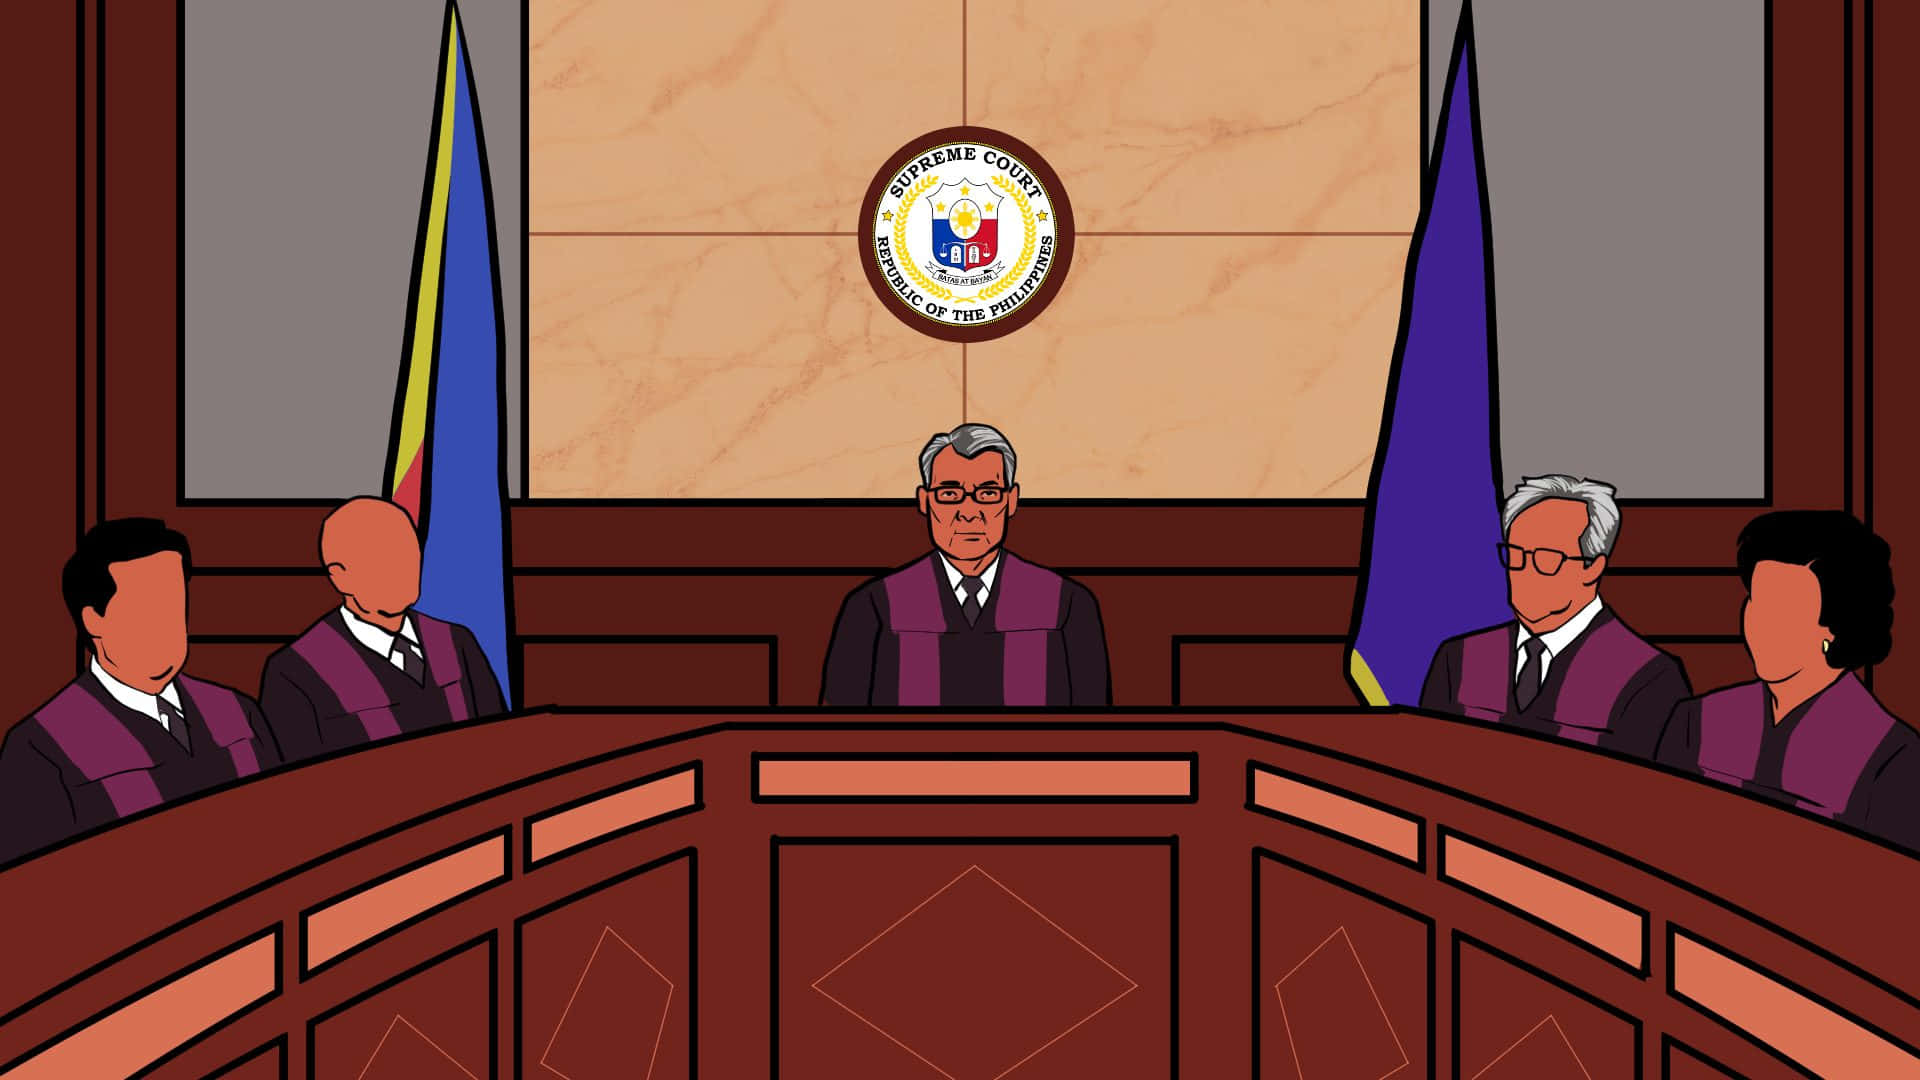 Chief Justice In Courtroom Background Vector Art